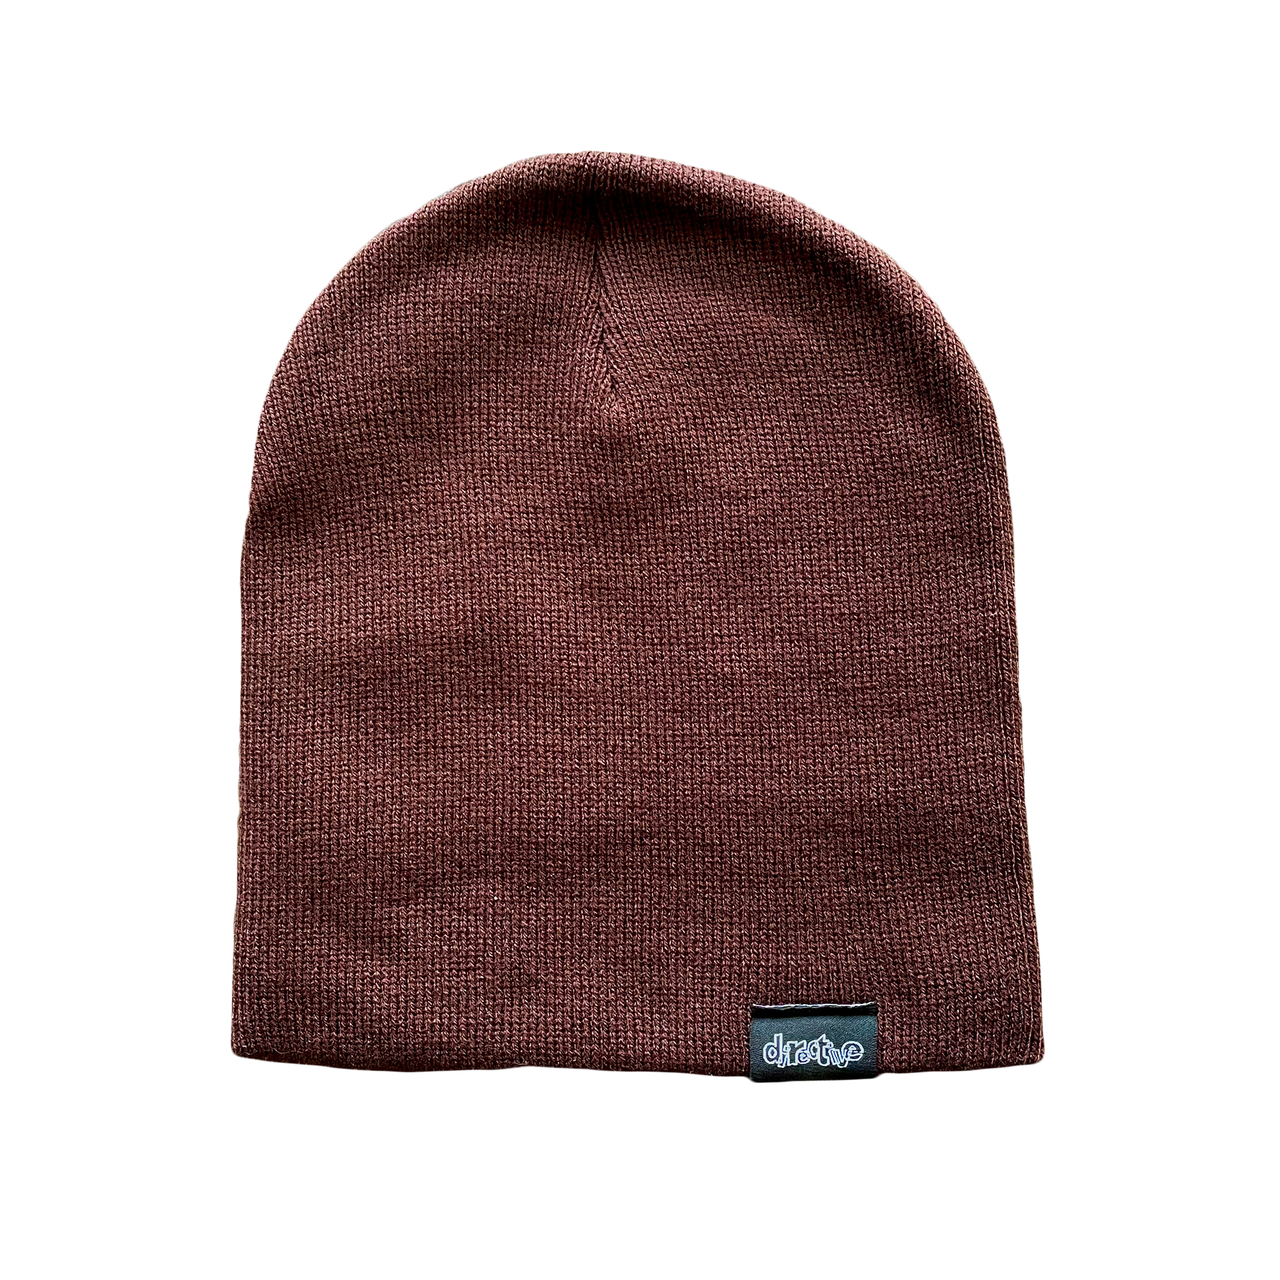 Directive Classic Skully Beanie - Assorted Colors